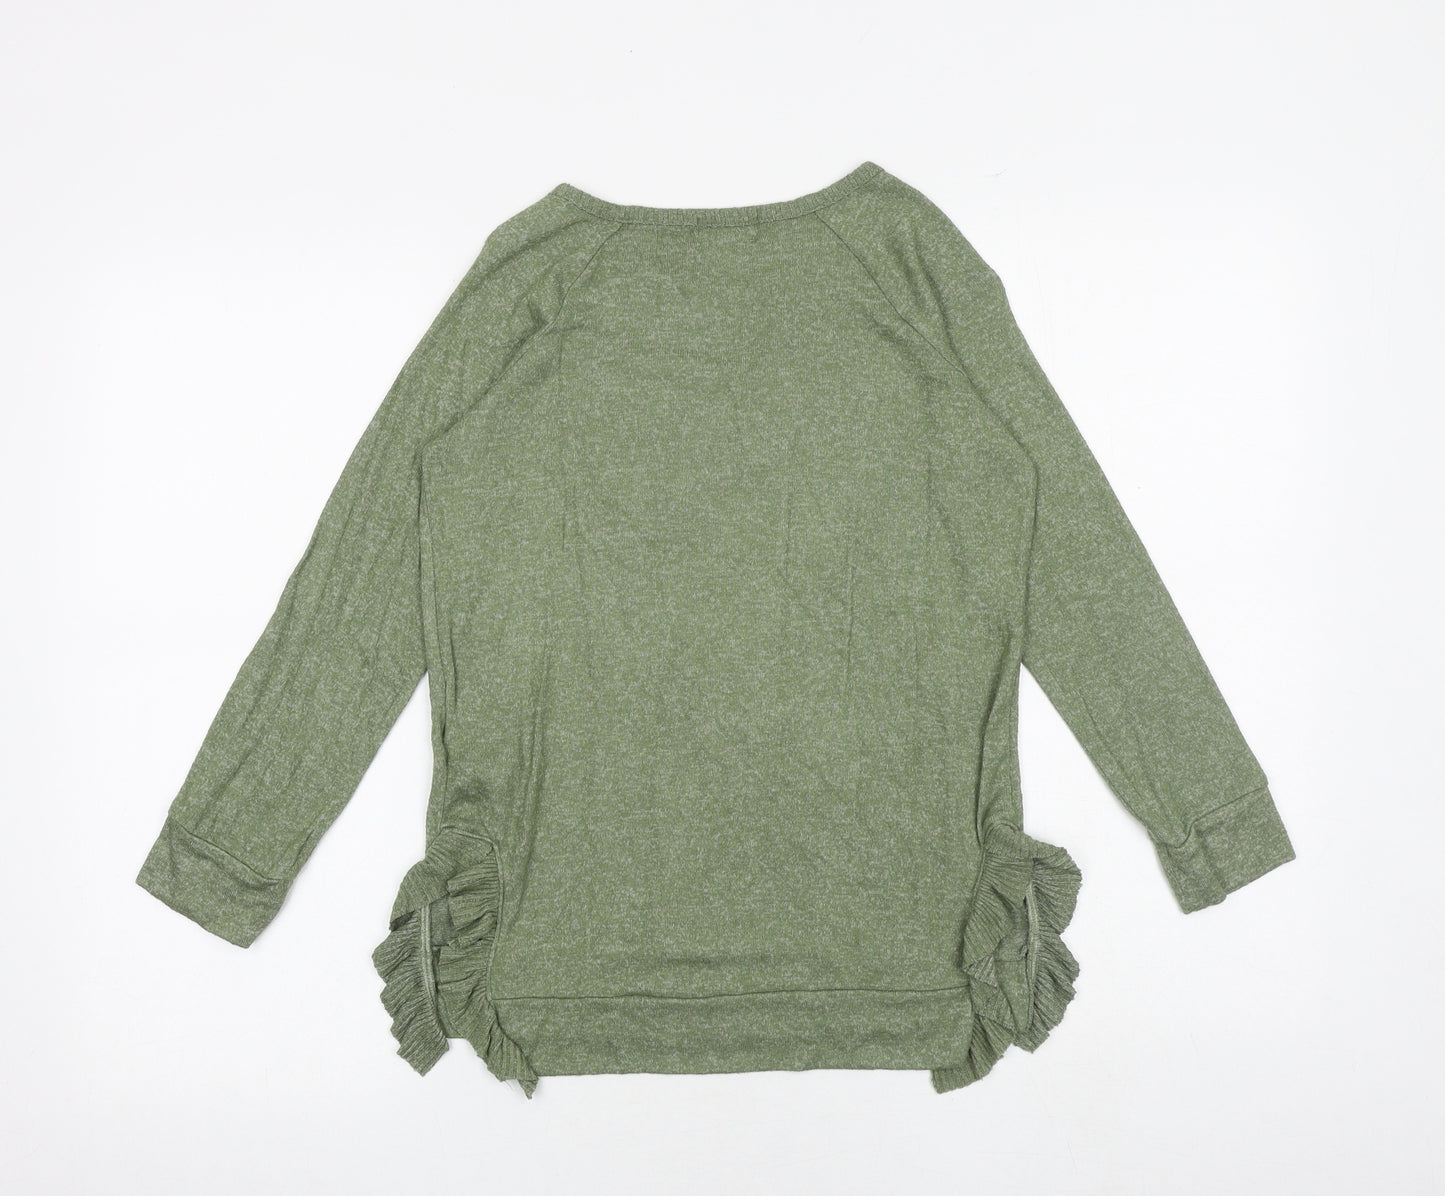 Old Navy Girls Green Viscose Basic T-Shirt Size 11-12 Years Round Neck Pullover - Rise Above